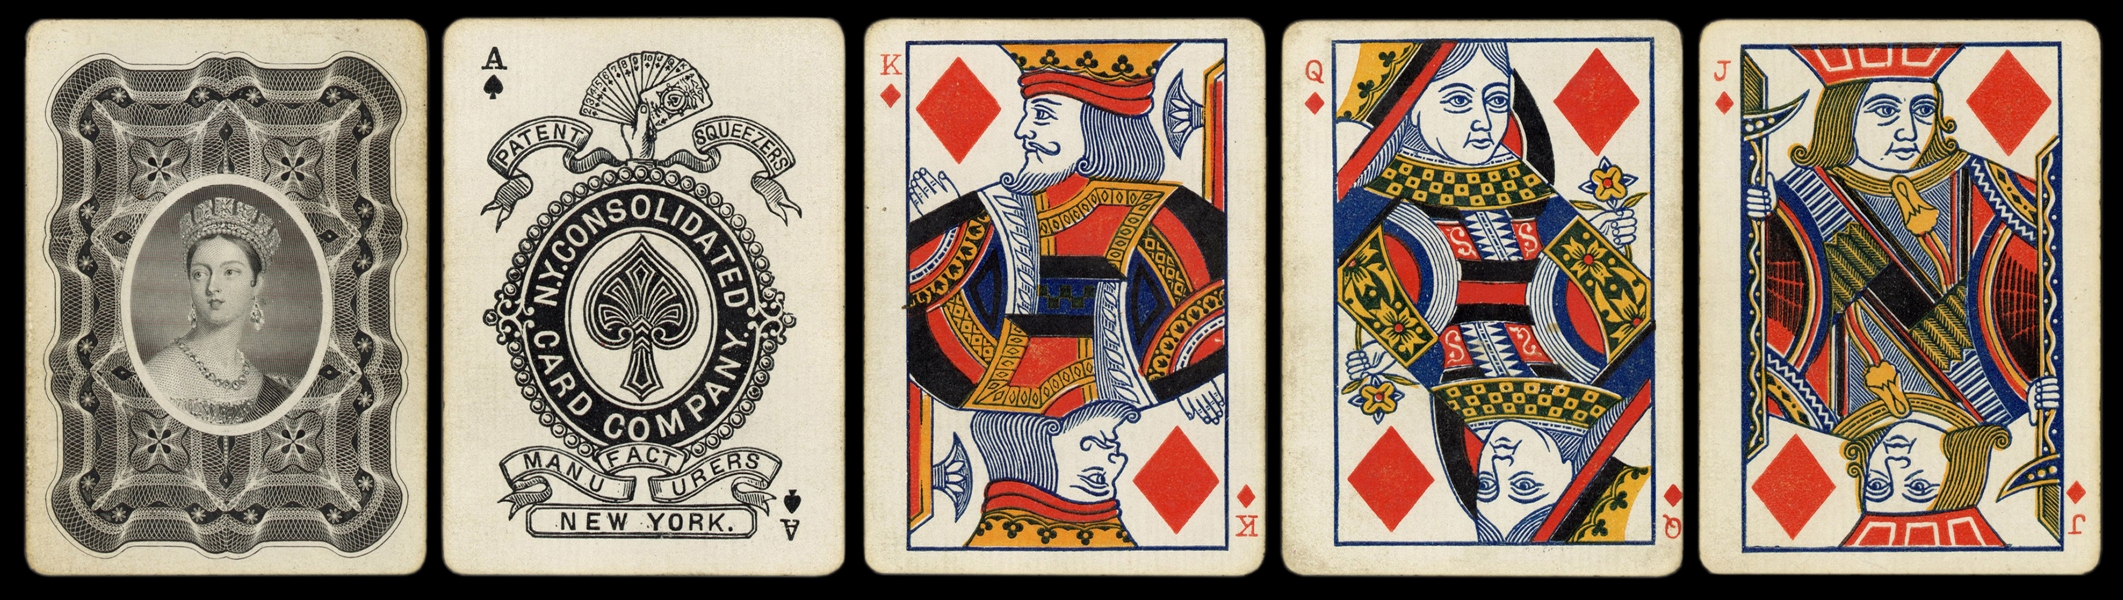  [British Royalty] Patent Squeezers Playing Cards. New York:...